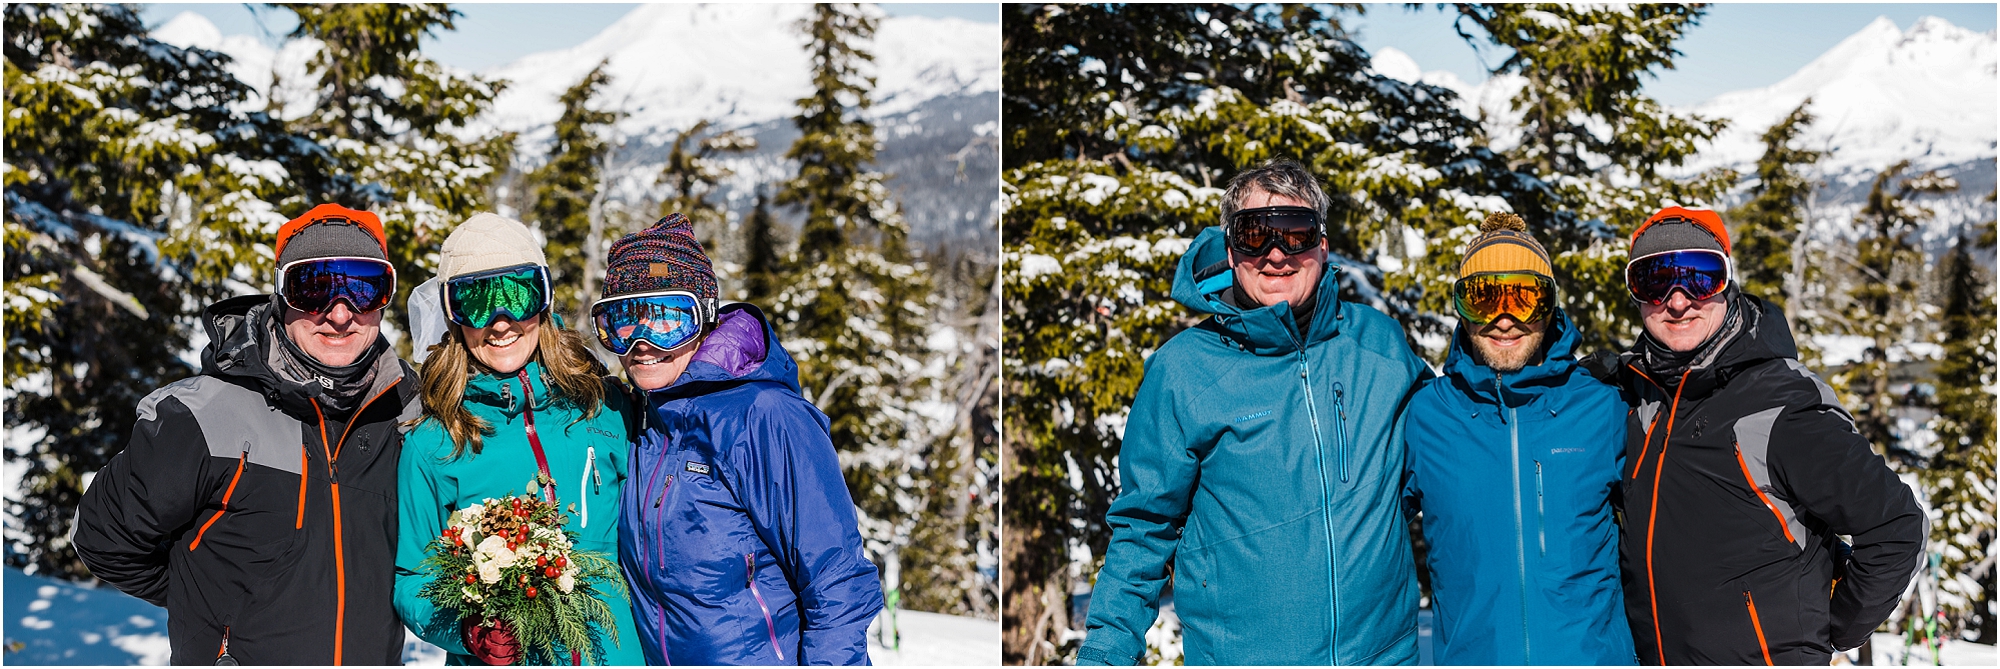 The wedding guests, all wearing winter ski and snowboard gear, celebrate this Mt Bachelor adventure elopement in Oregon. | Erica Swantek Photography